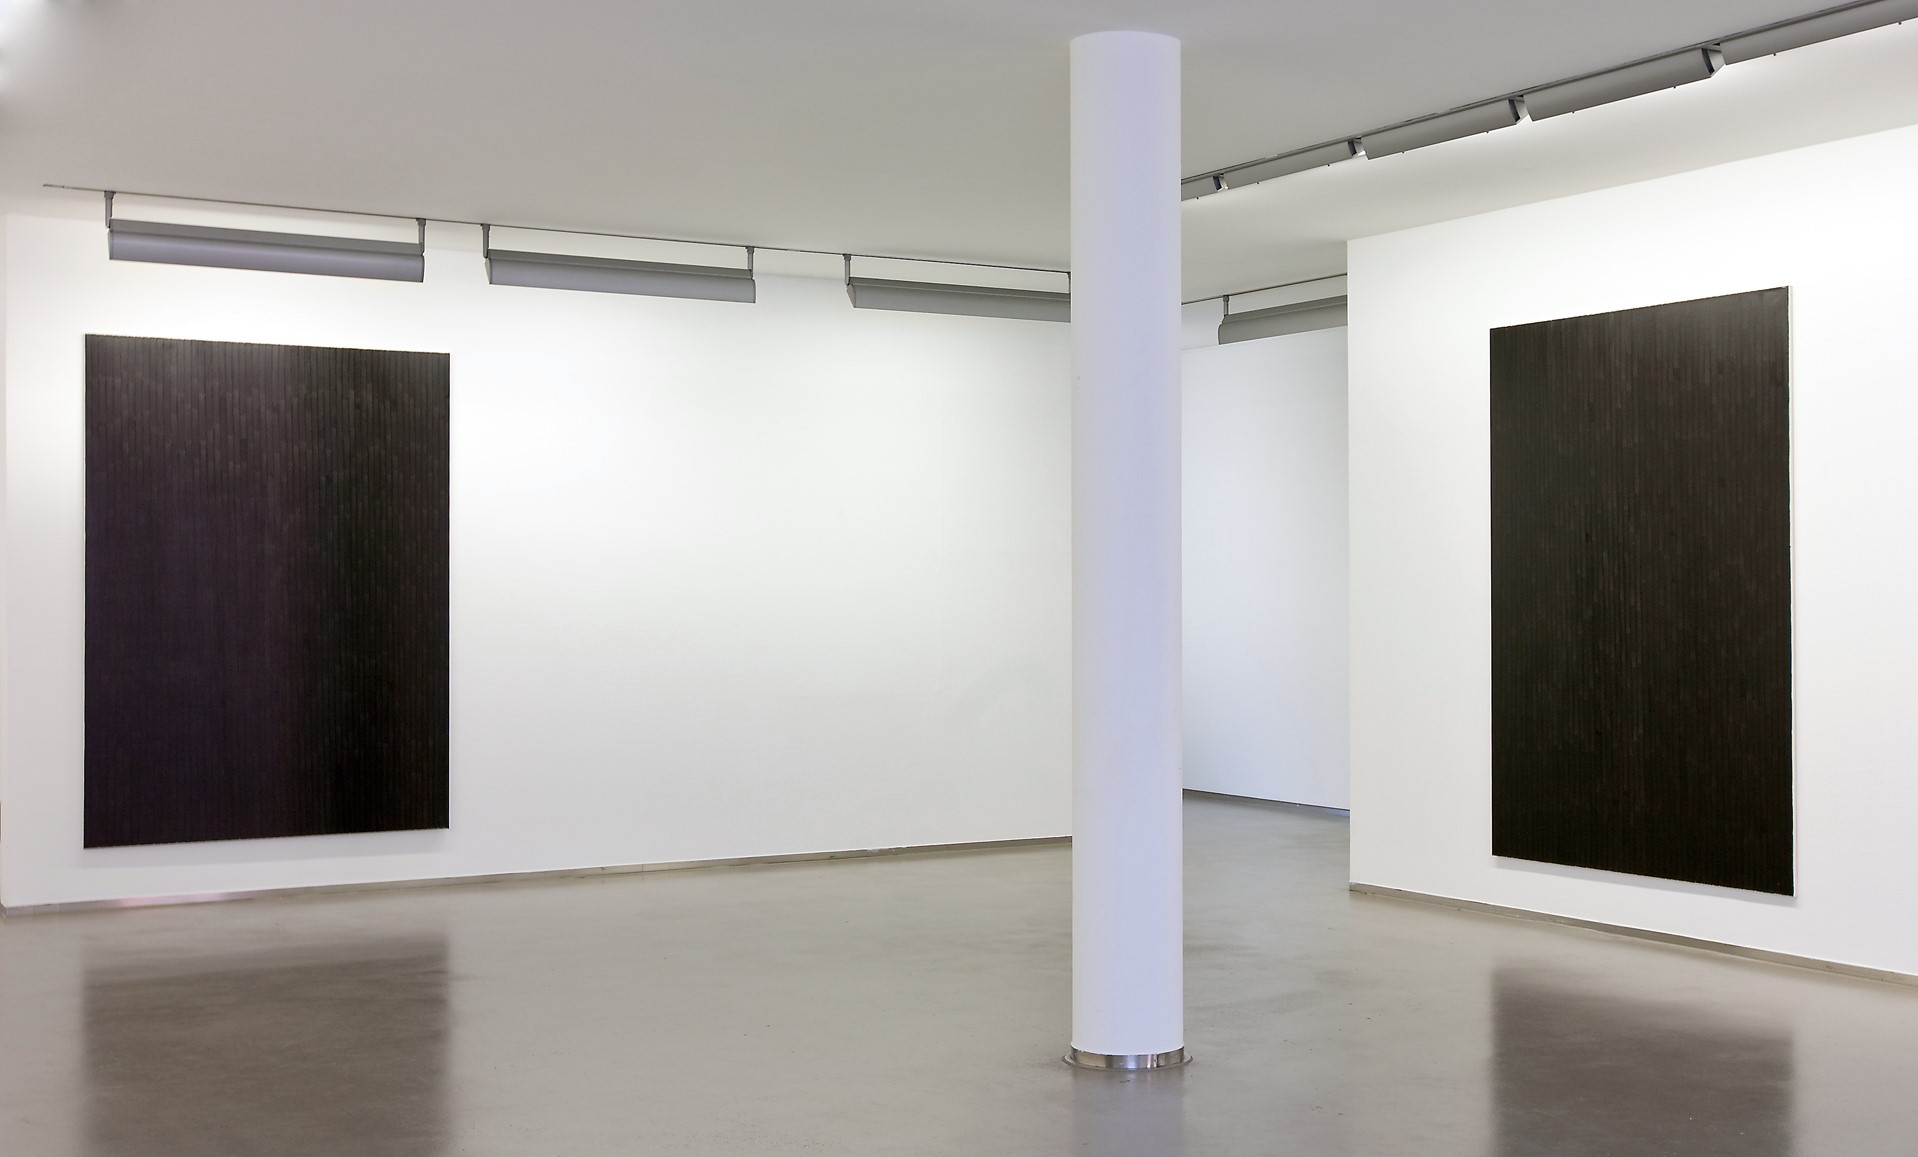 Holger Endres, Exhibition view, 2009